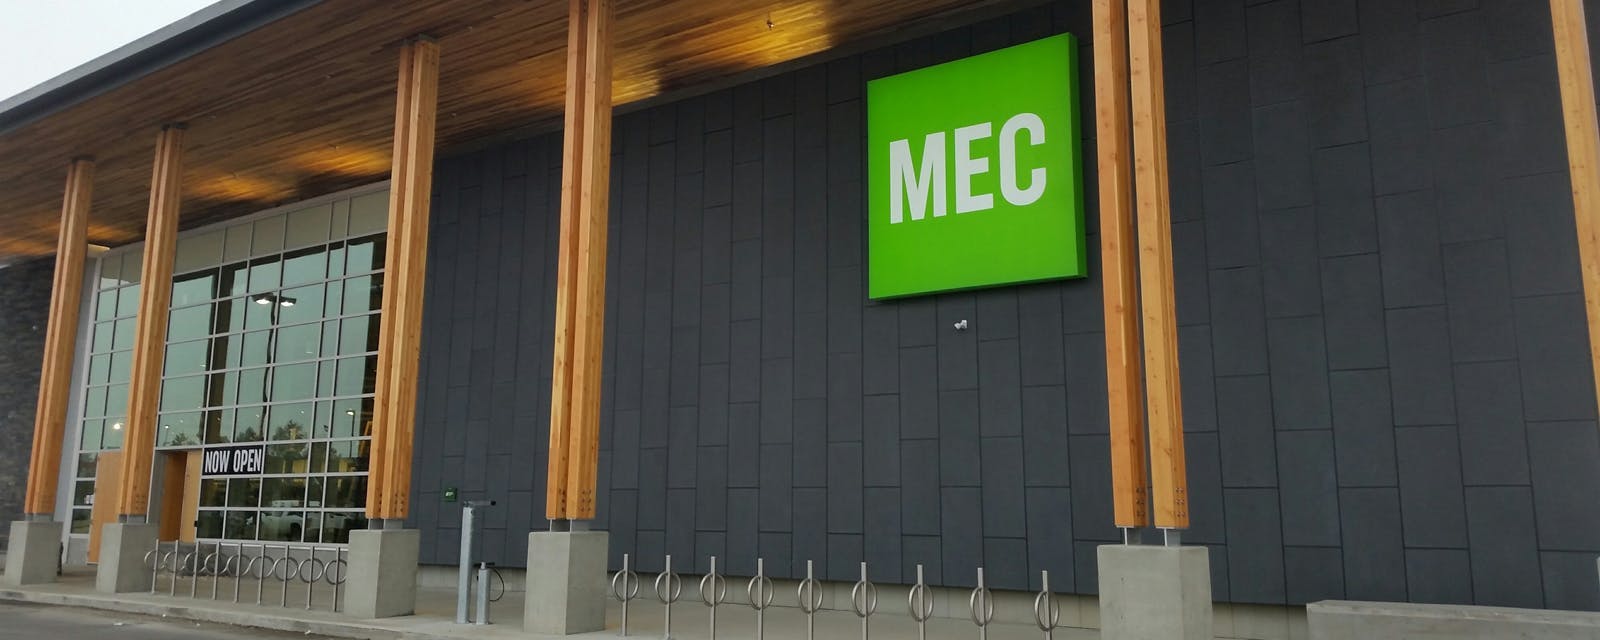 If you love trails, snow, water or fresh air, this is your store. Visit MEC South Edmonton for outdoor gear, know-how and inspiration.